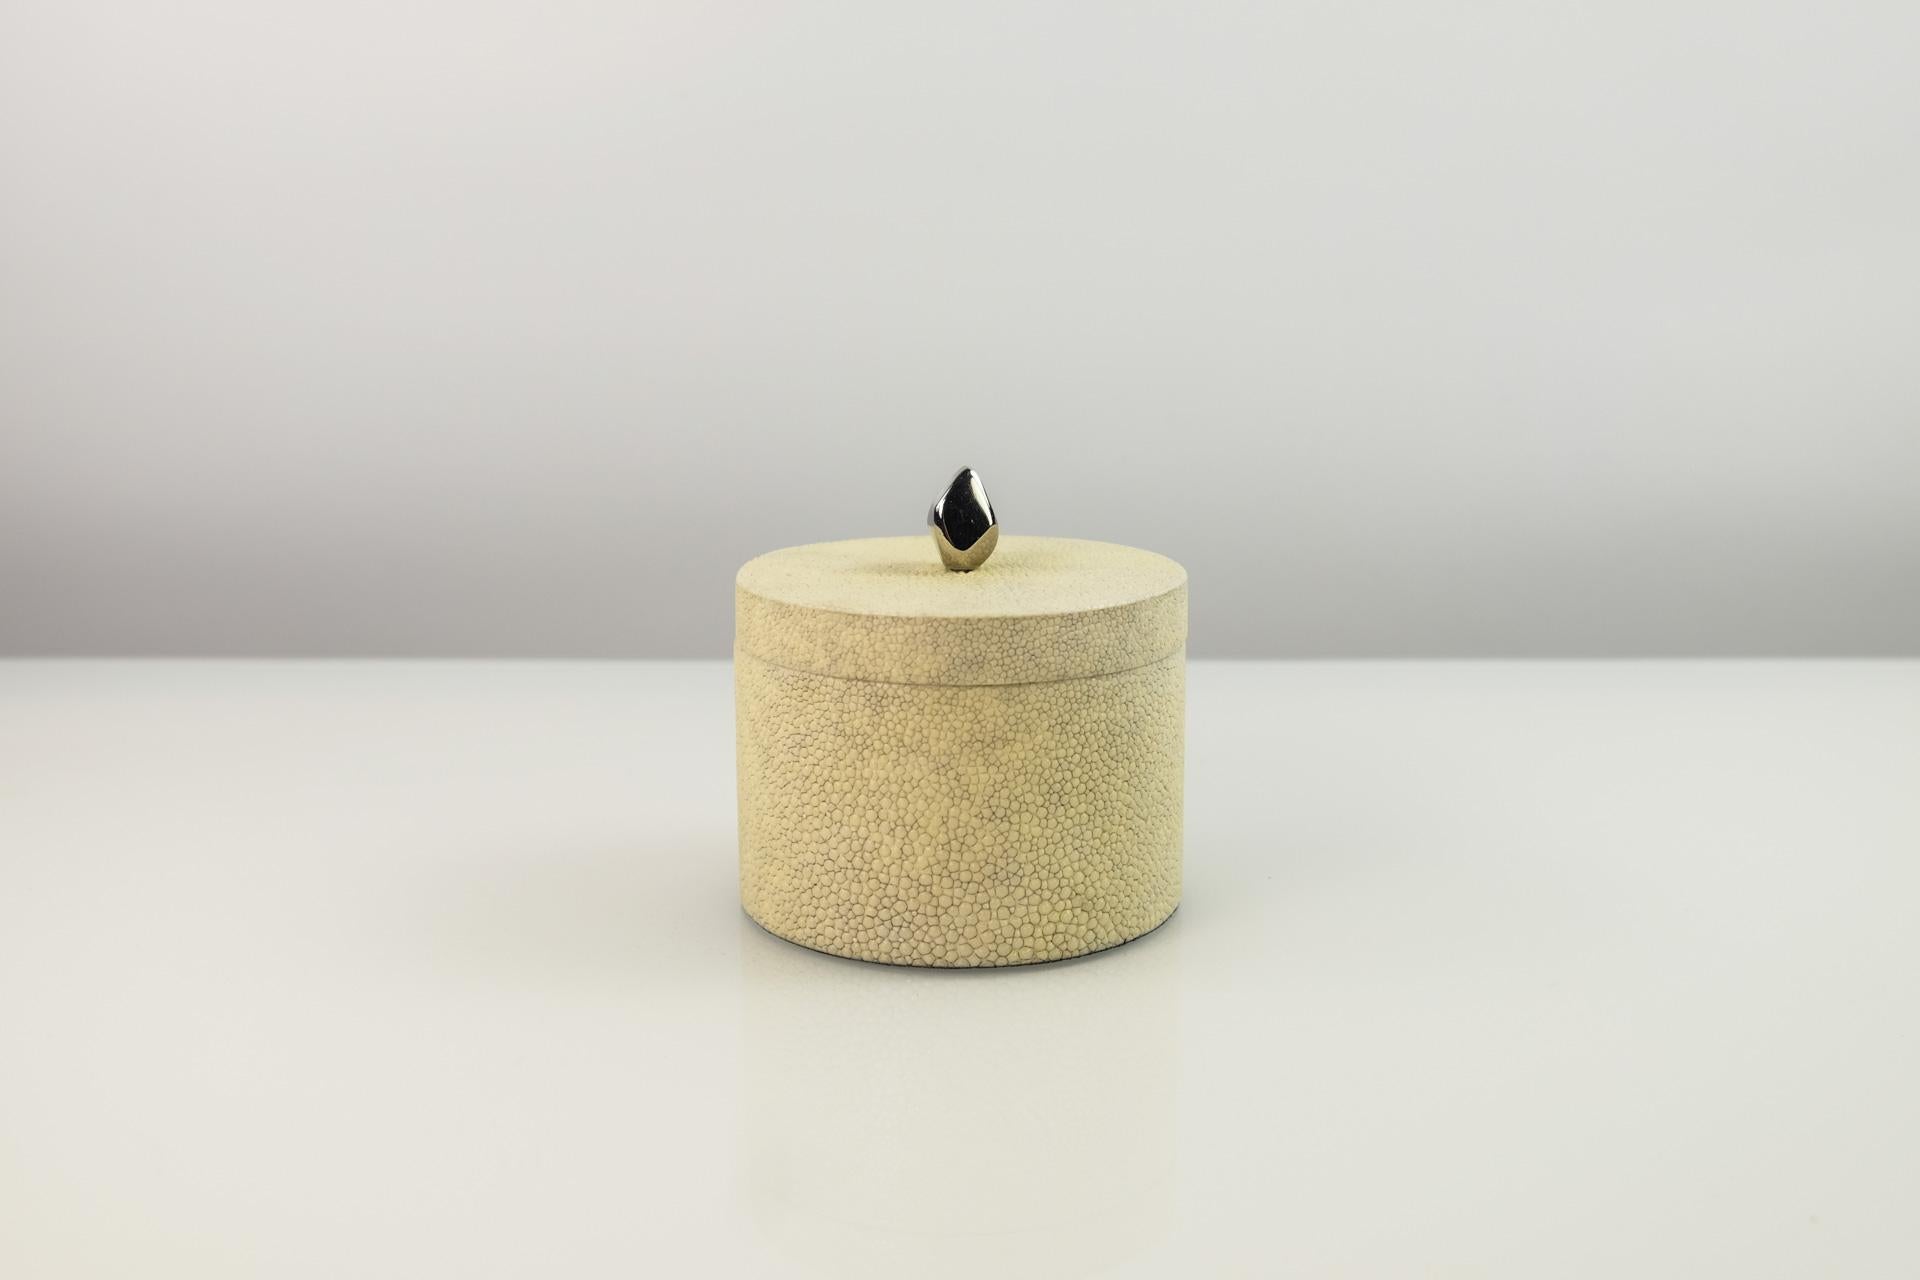 This set of 2 round boxes is made of shagreen.
These boxes have a nickel brass handle. 

They are lined with a black micro suede.

The color of this box is natural.

The dimensions of each piece is:
diameter 3.34